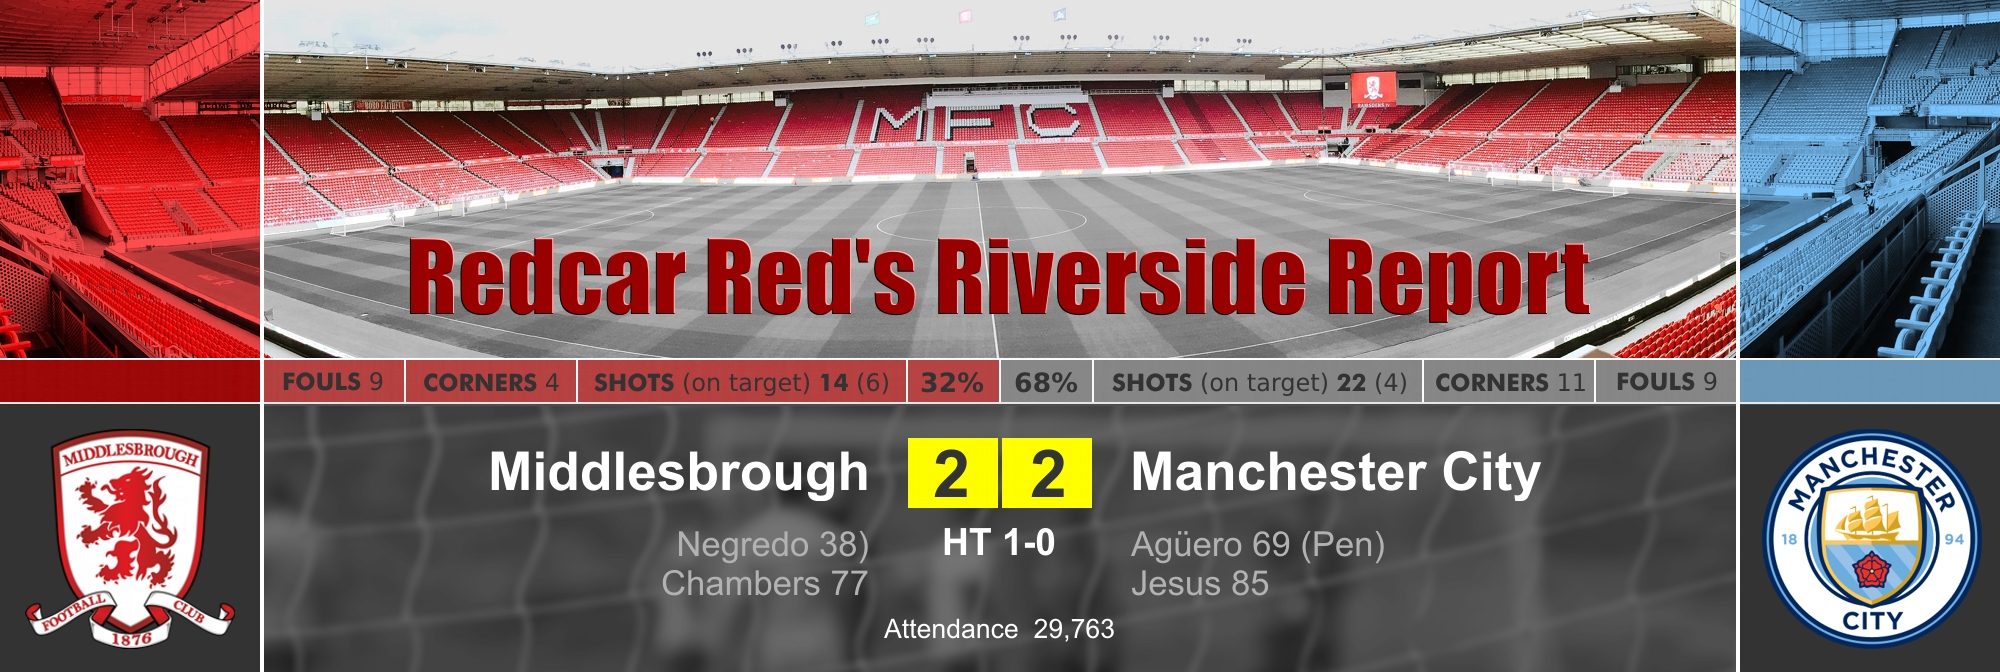 Redcar Red Report - Man City PL